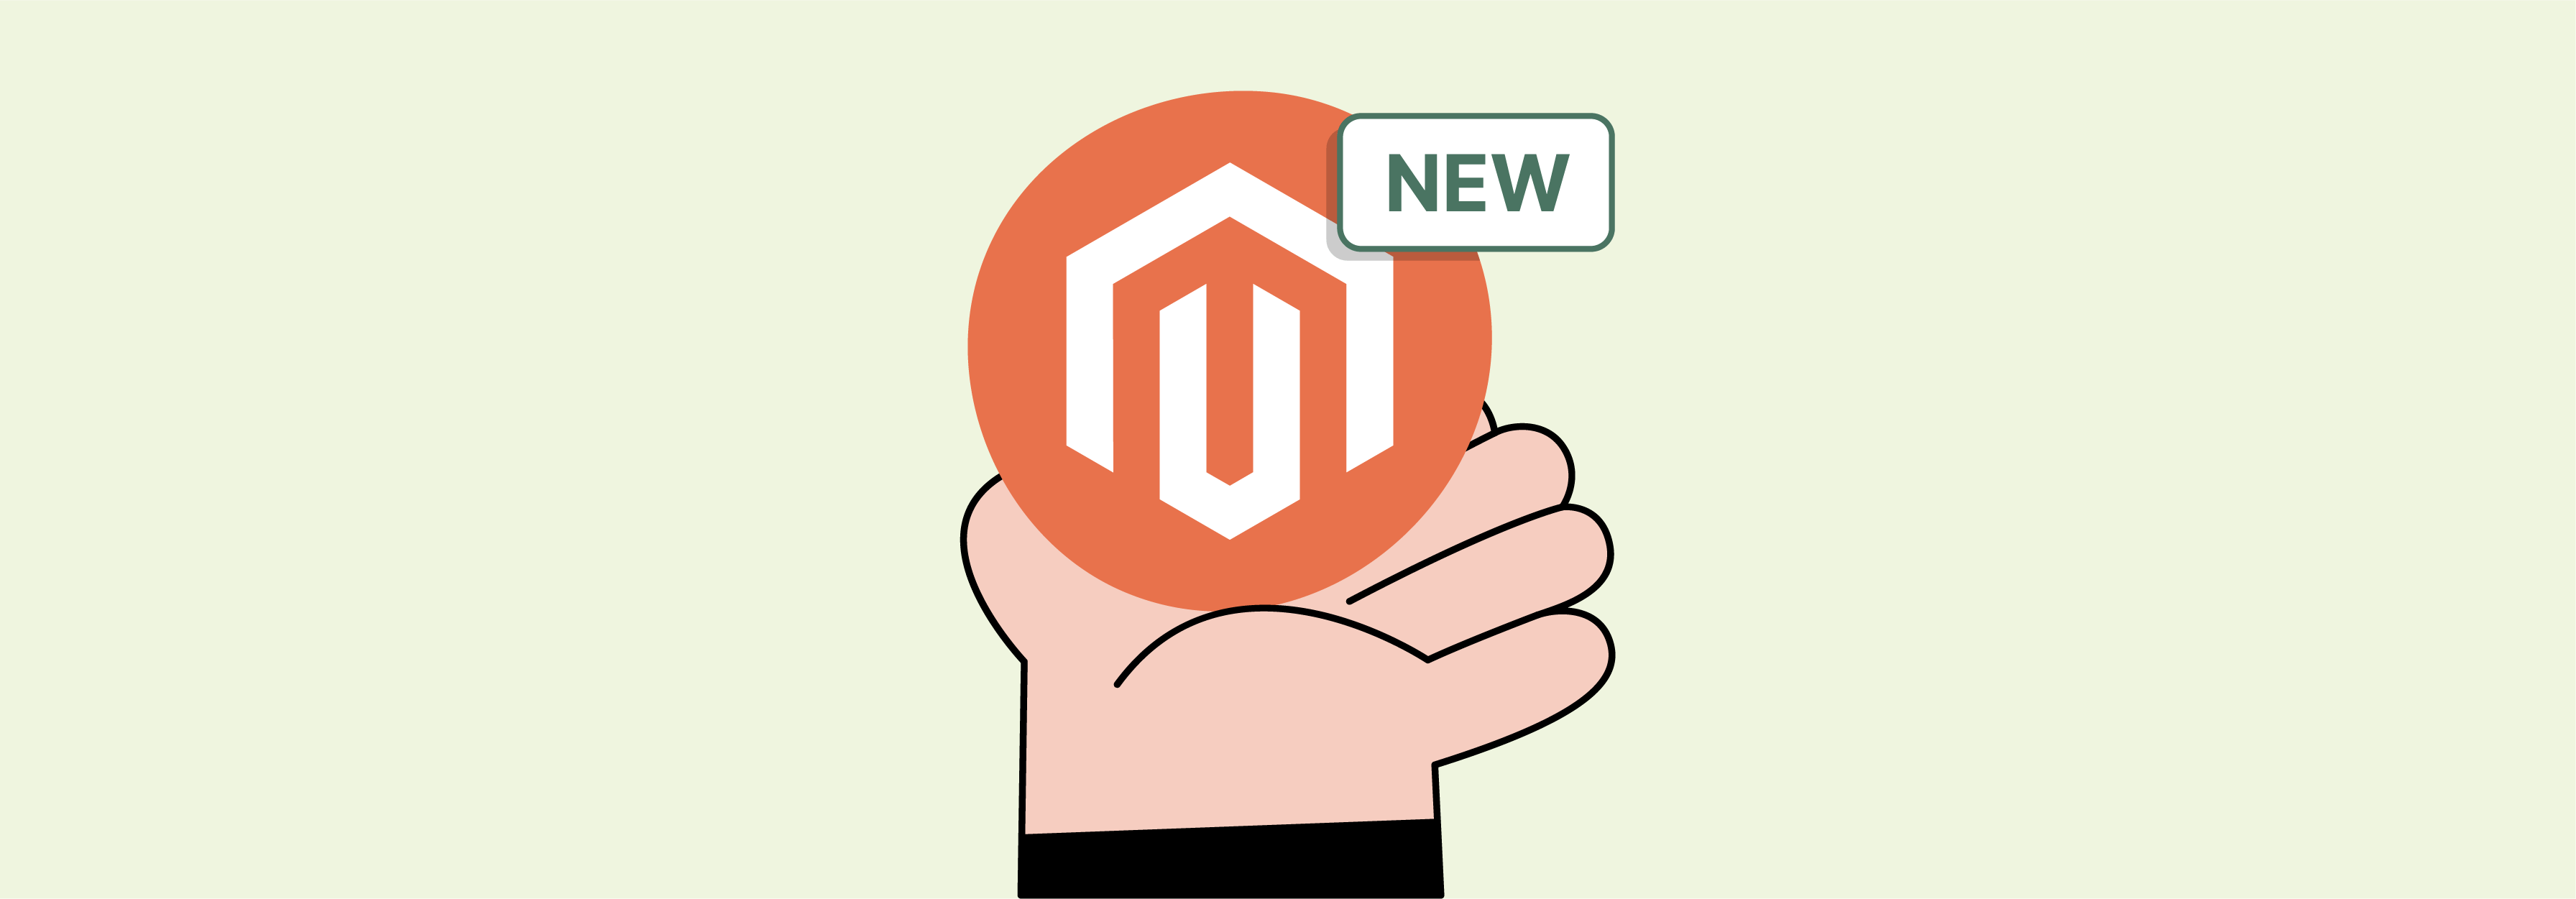 Updating Magento to the Latest Version for Security